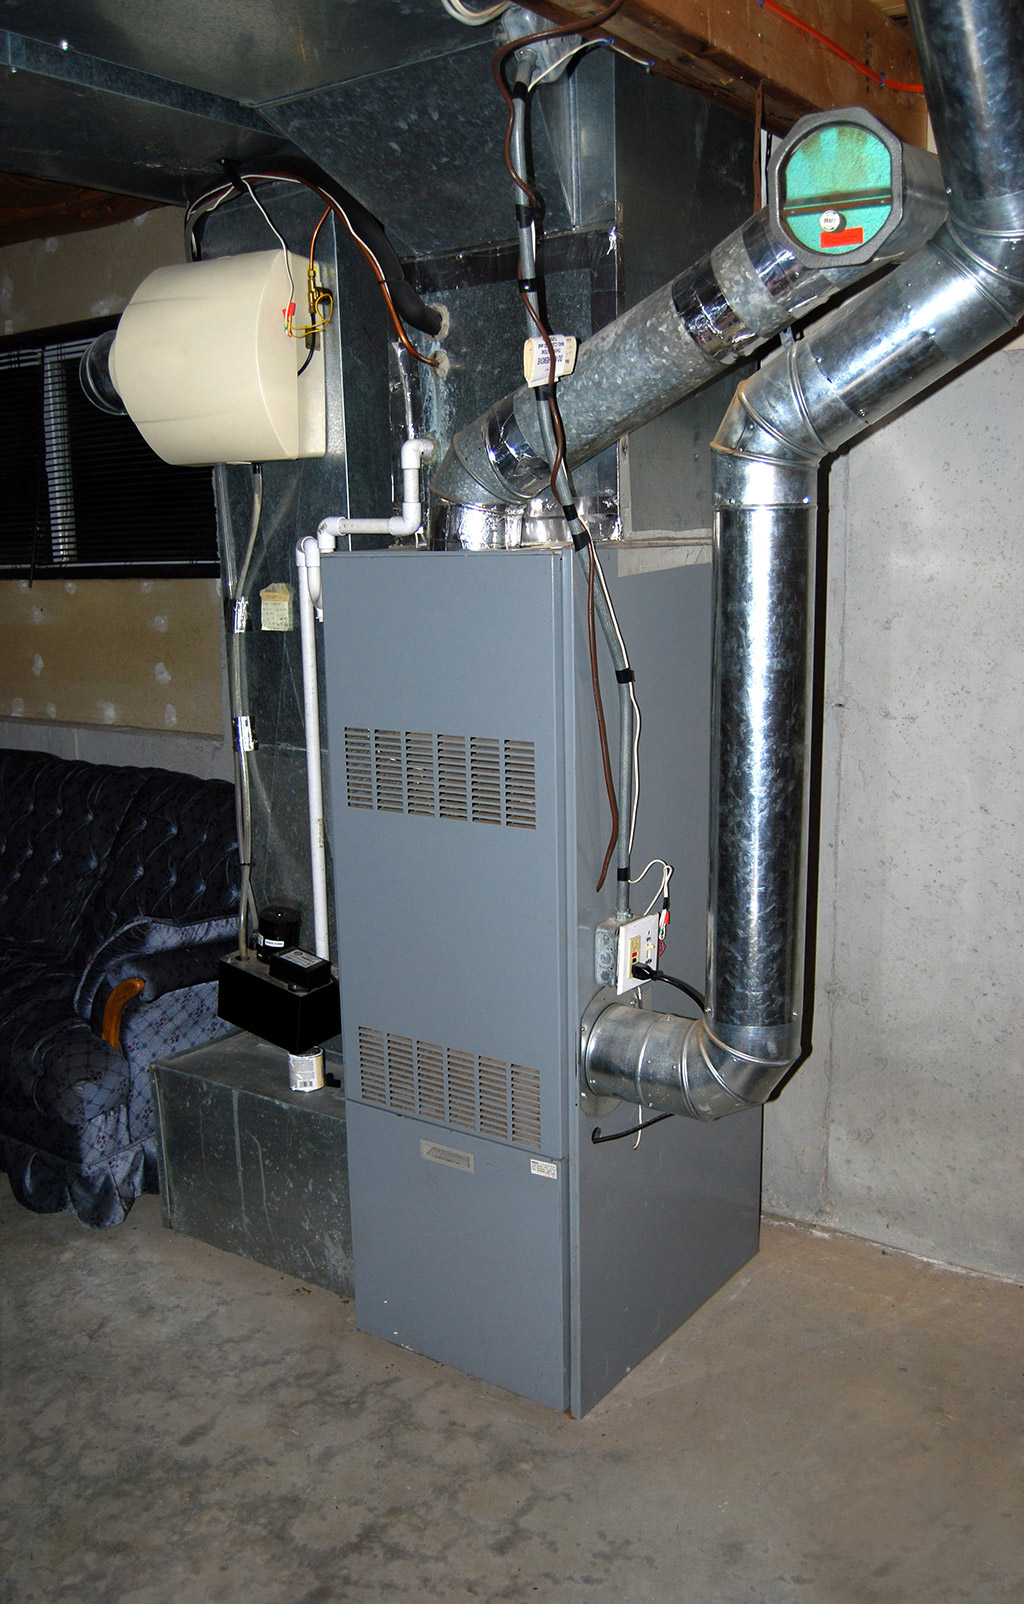 Heating and Air Conditioning Repair in Farmers Branch, TX Explains the Benefits of Adding a Humidifier to Your HVAC System